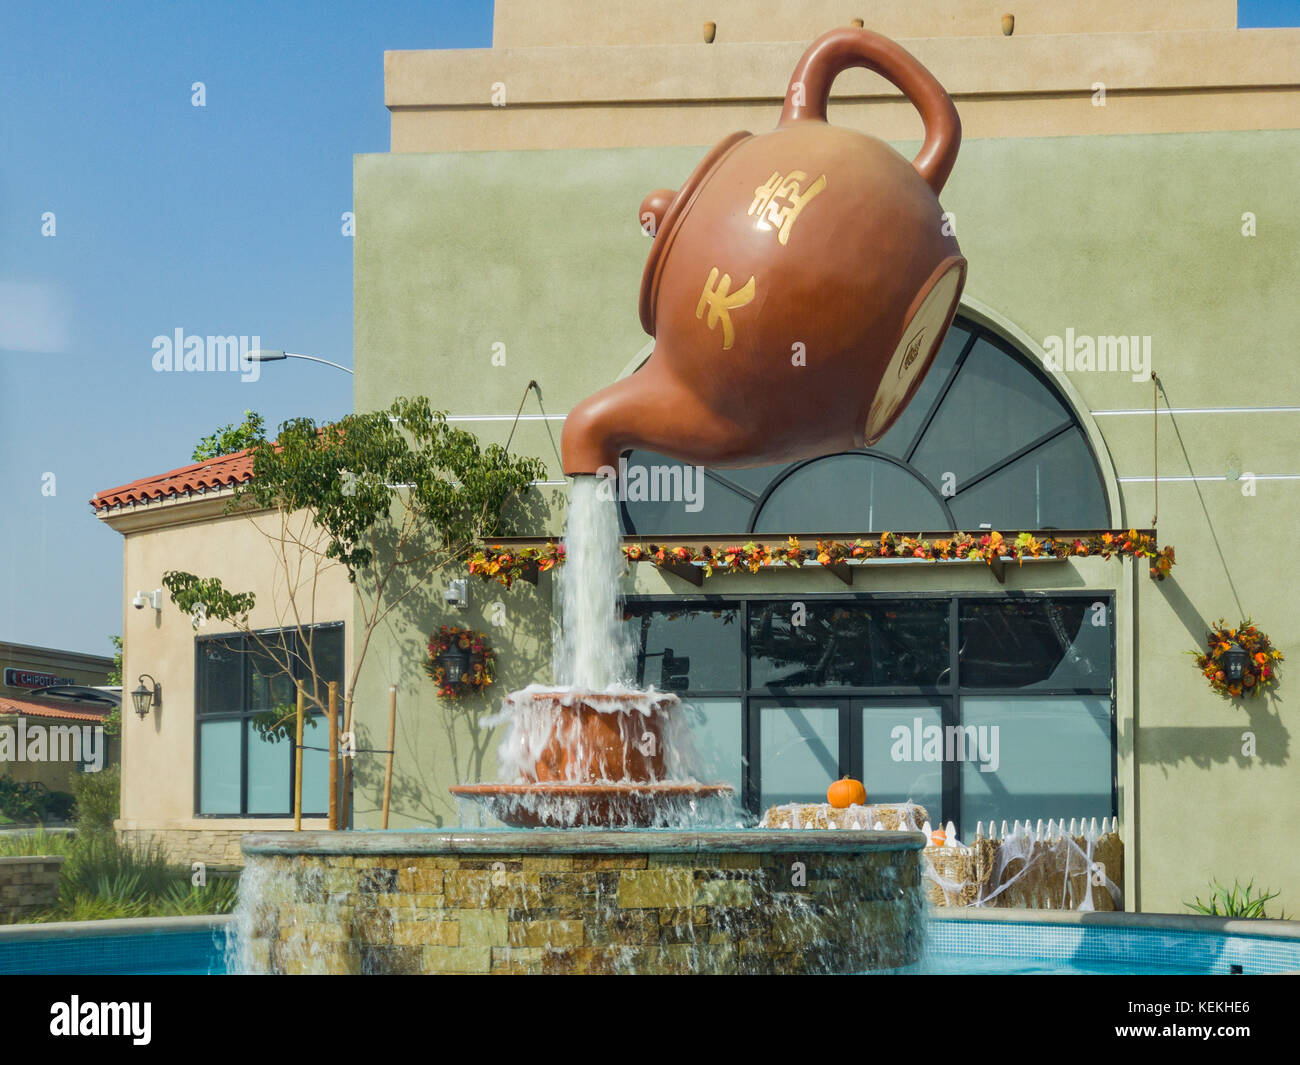 Temple City, OCT 19: Tea pot fountain in the plaza on OCT 19, 2017 at Temple City, Los Angeles County, California Stock Photo